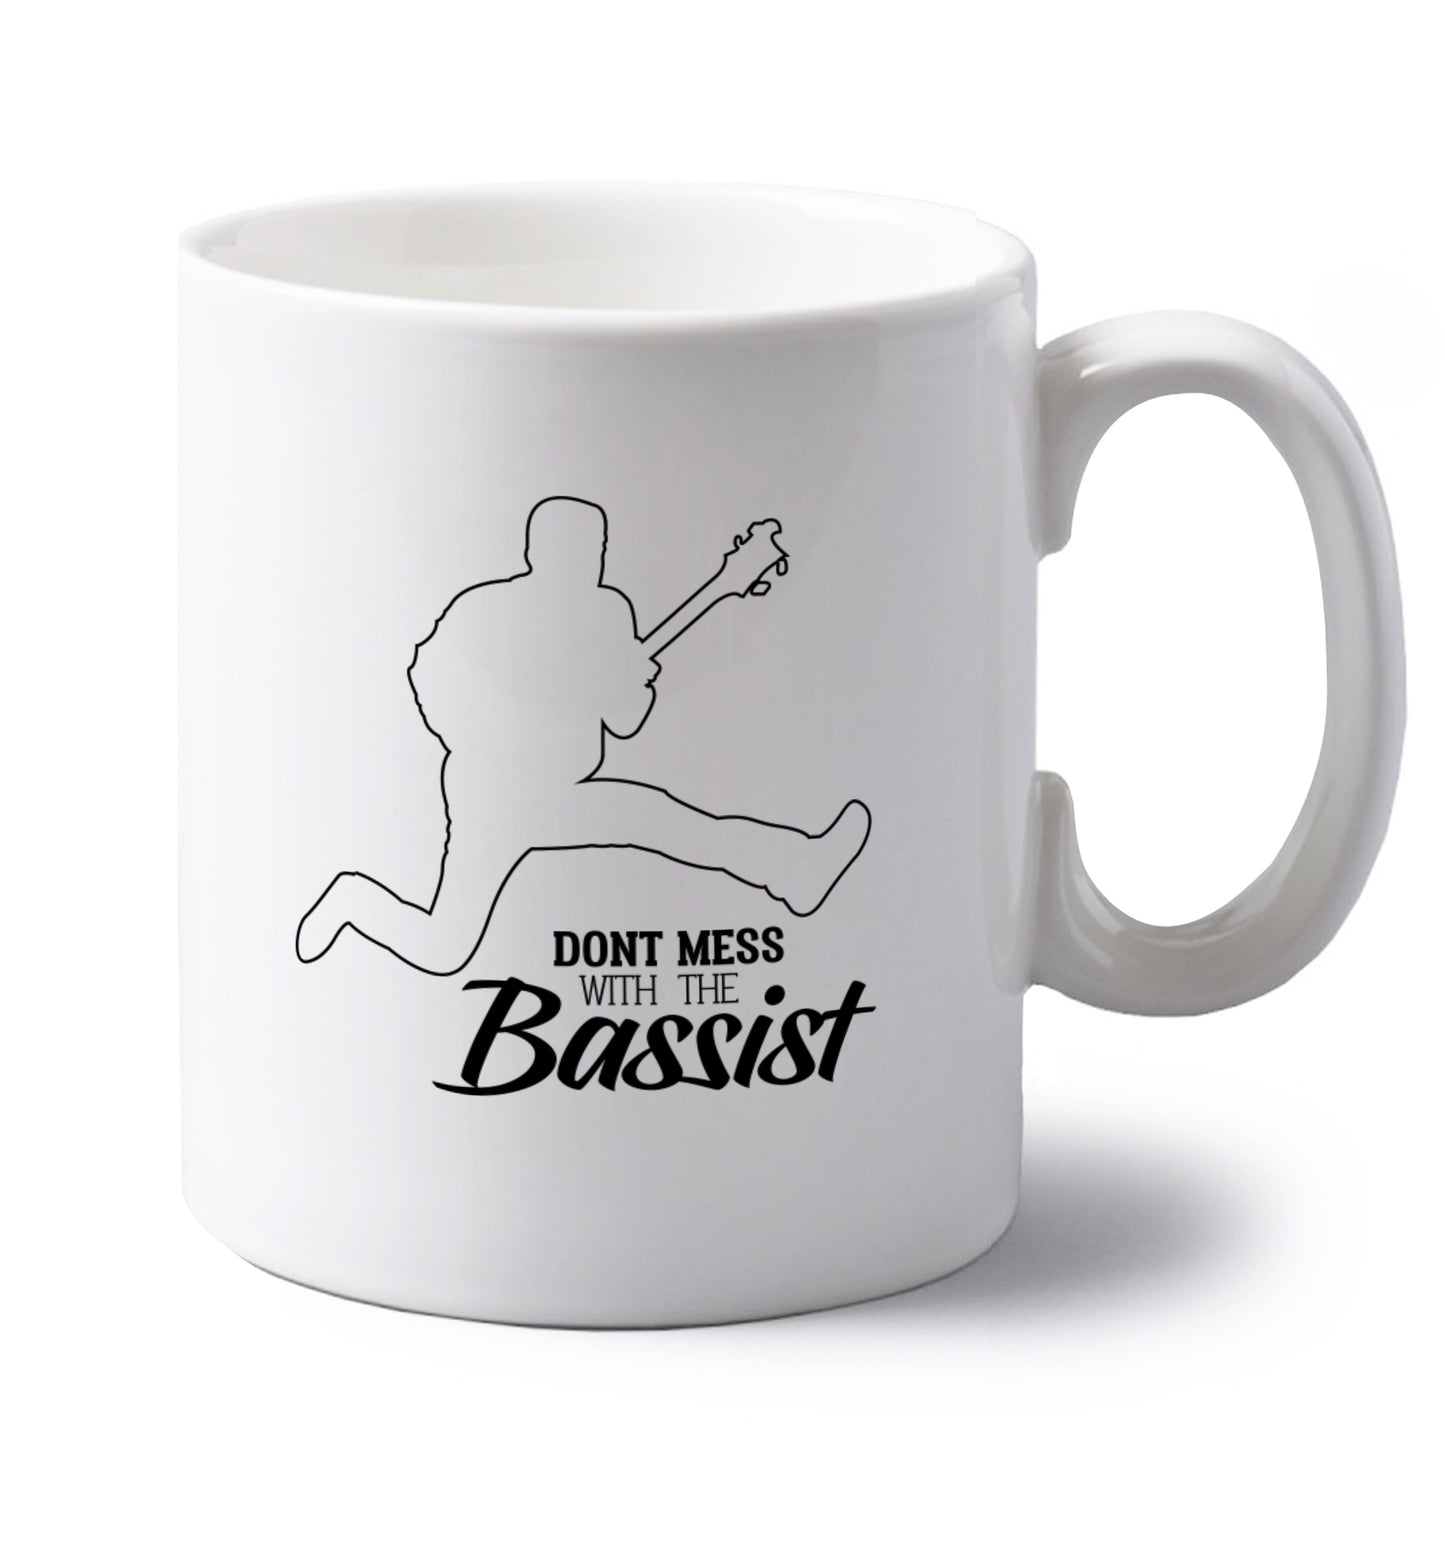 Dont mess with the bassist left handed white ceramic mug 